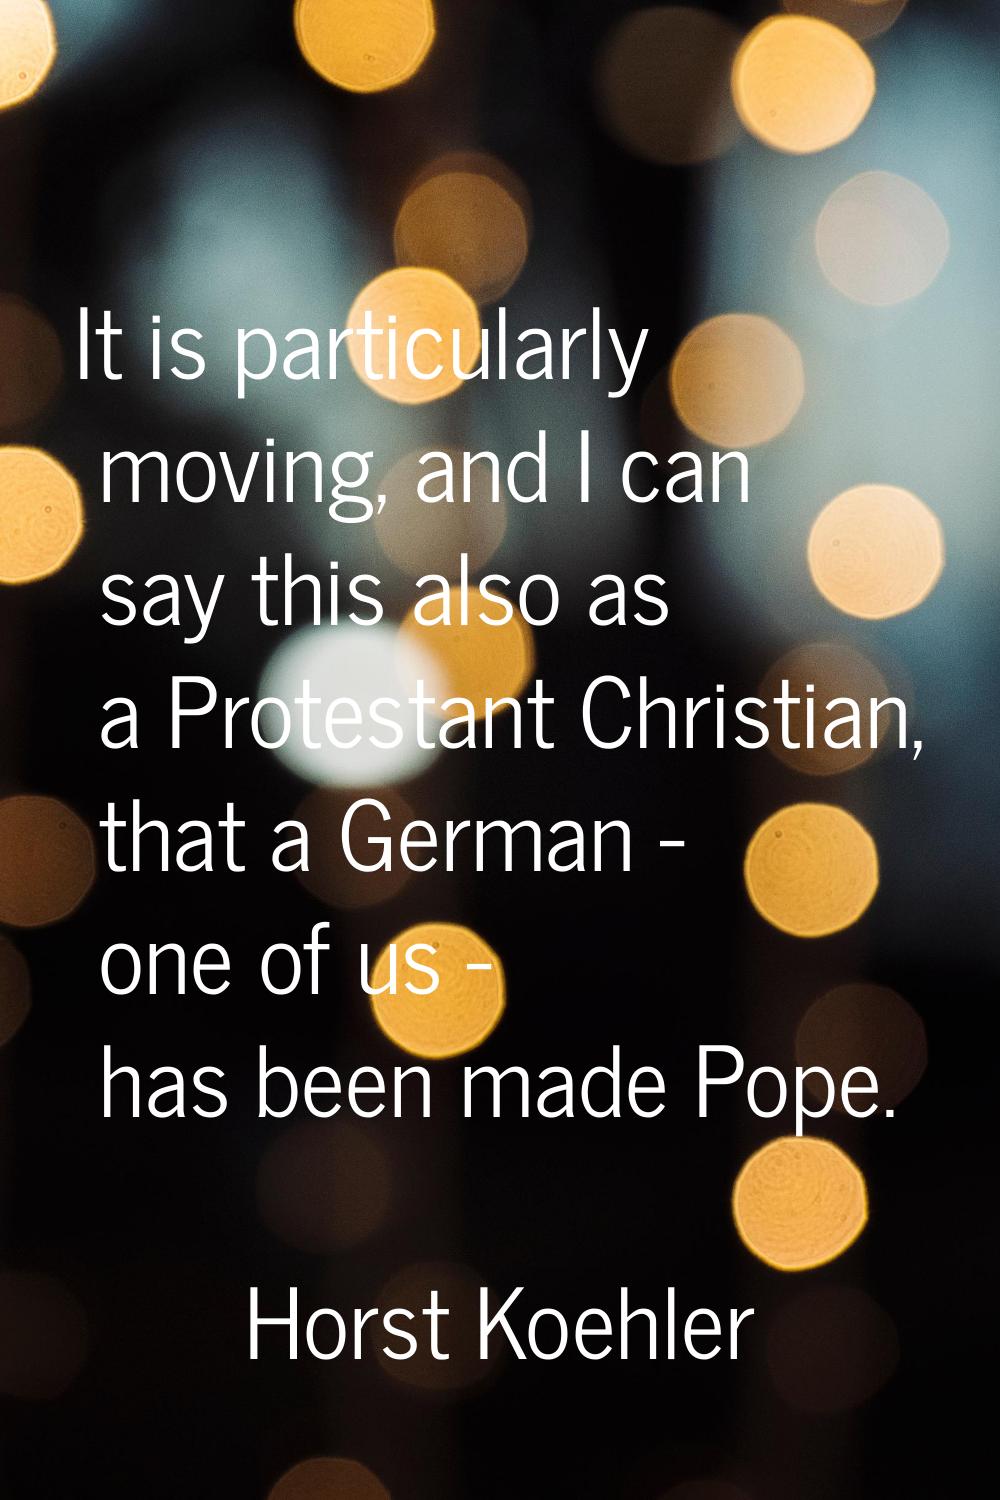 It is particularly moving, and I can say this also as a Protestant Christian, that a German - one o